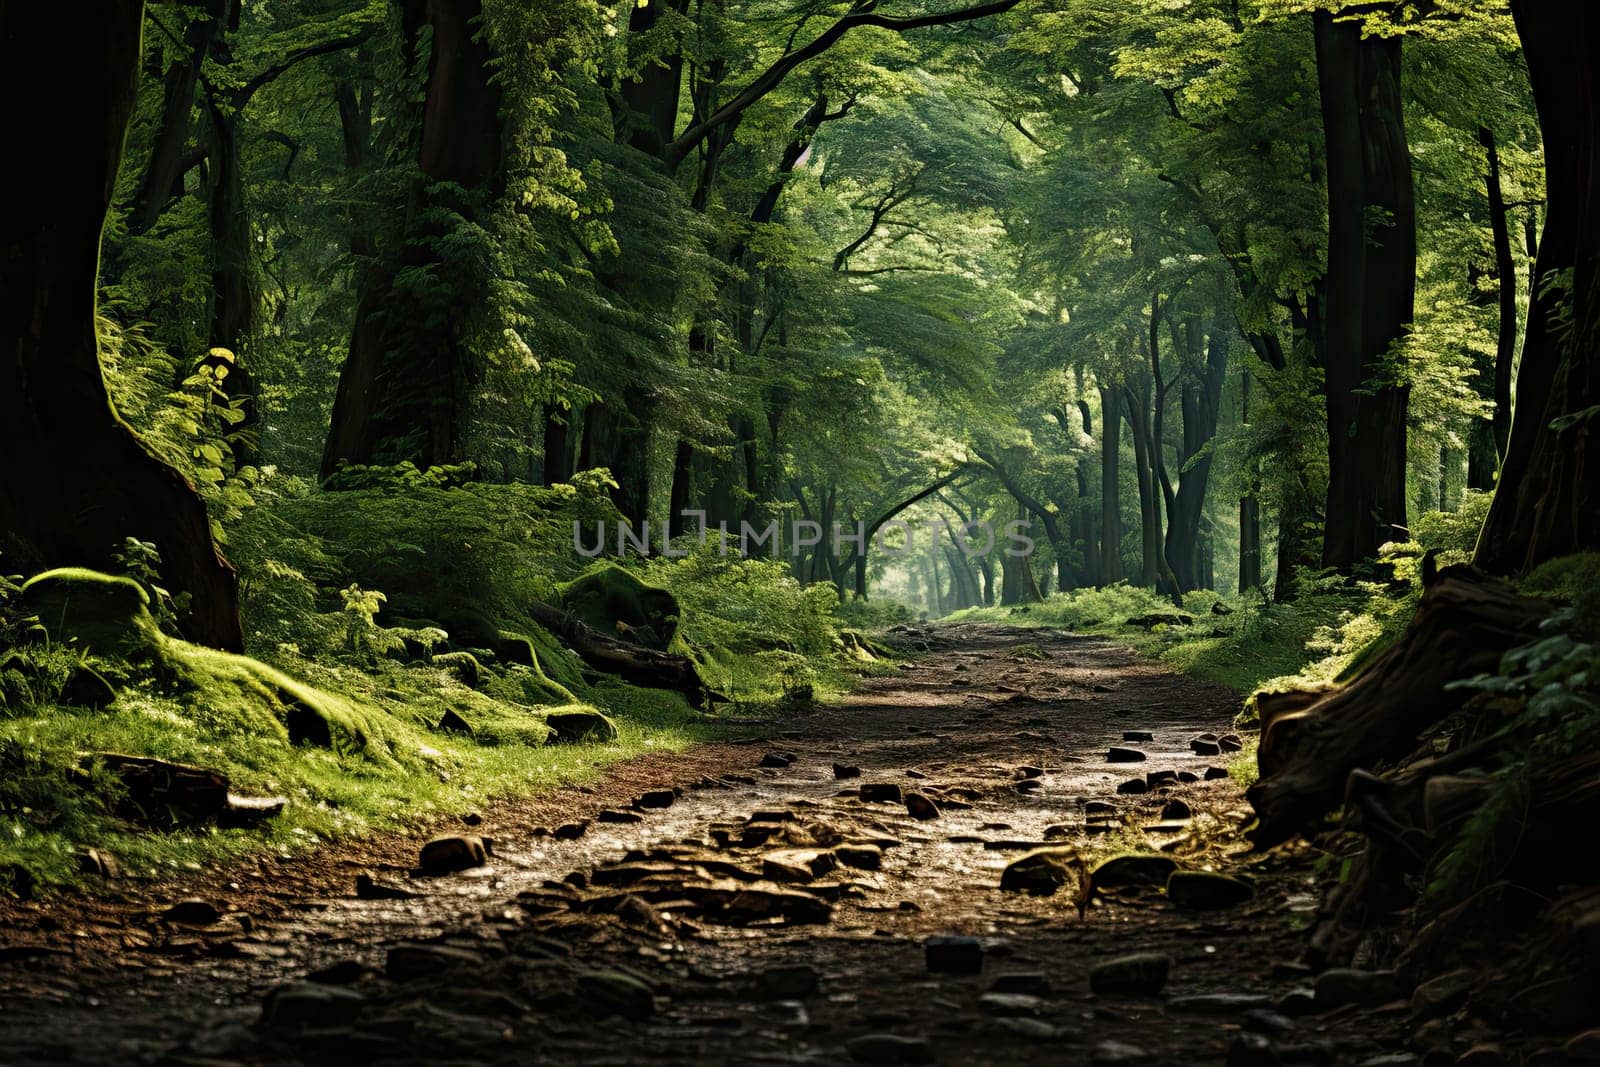 a dirt road in the middle of a forest with green trees and rocks on both sides, as if there is no one